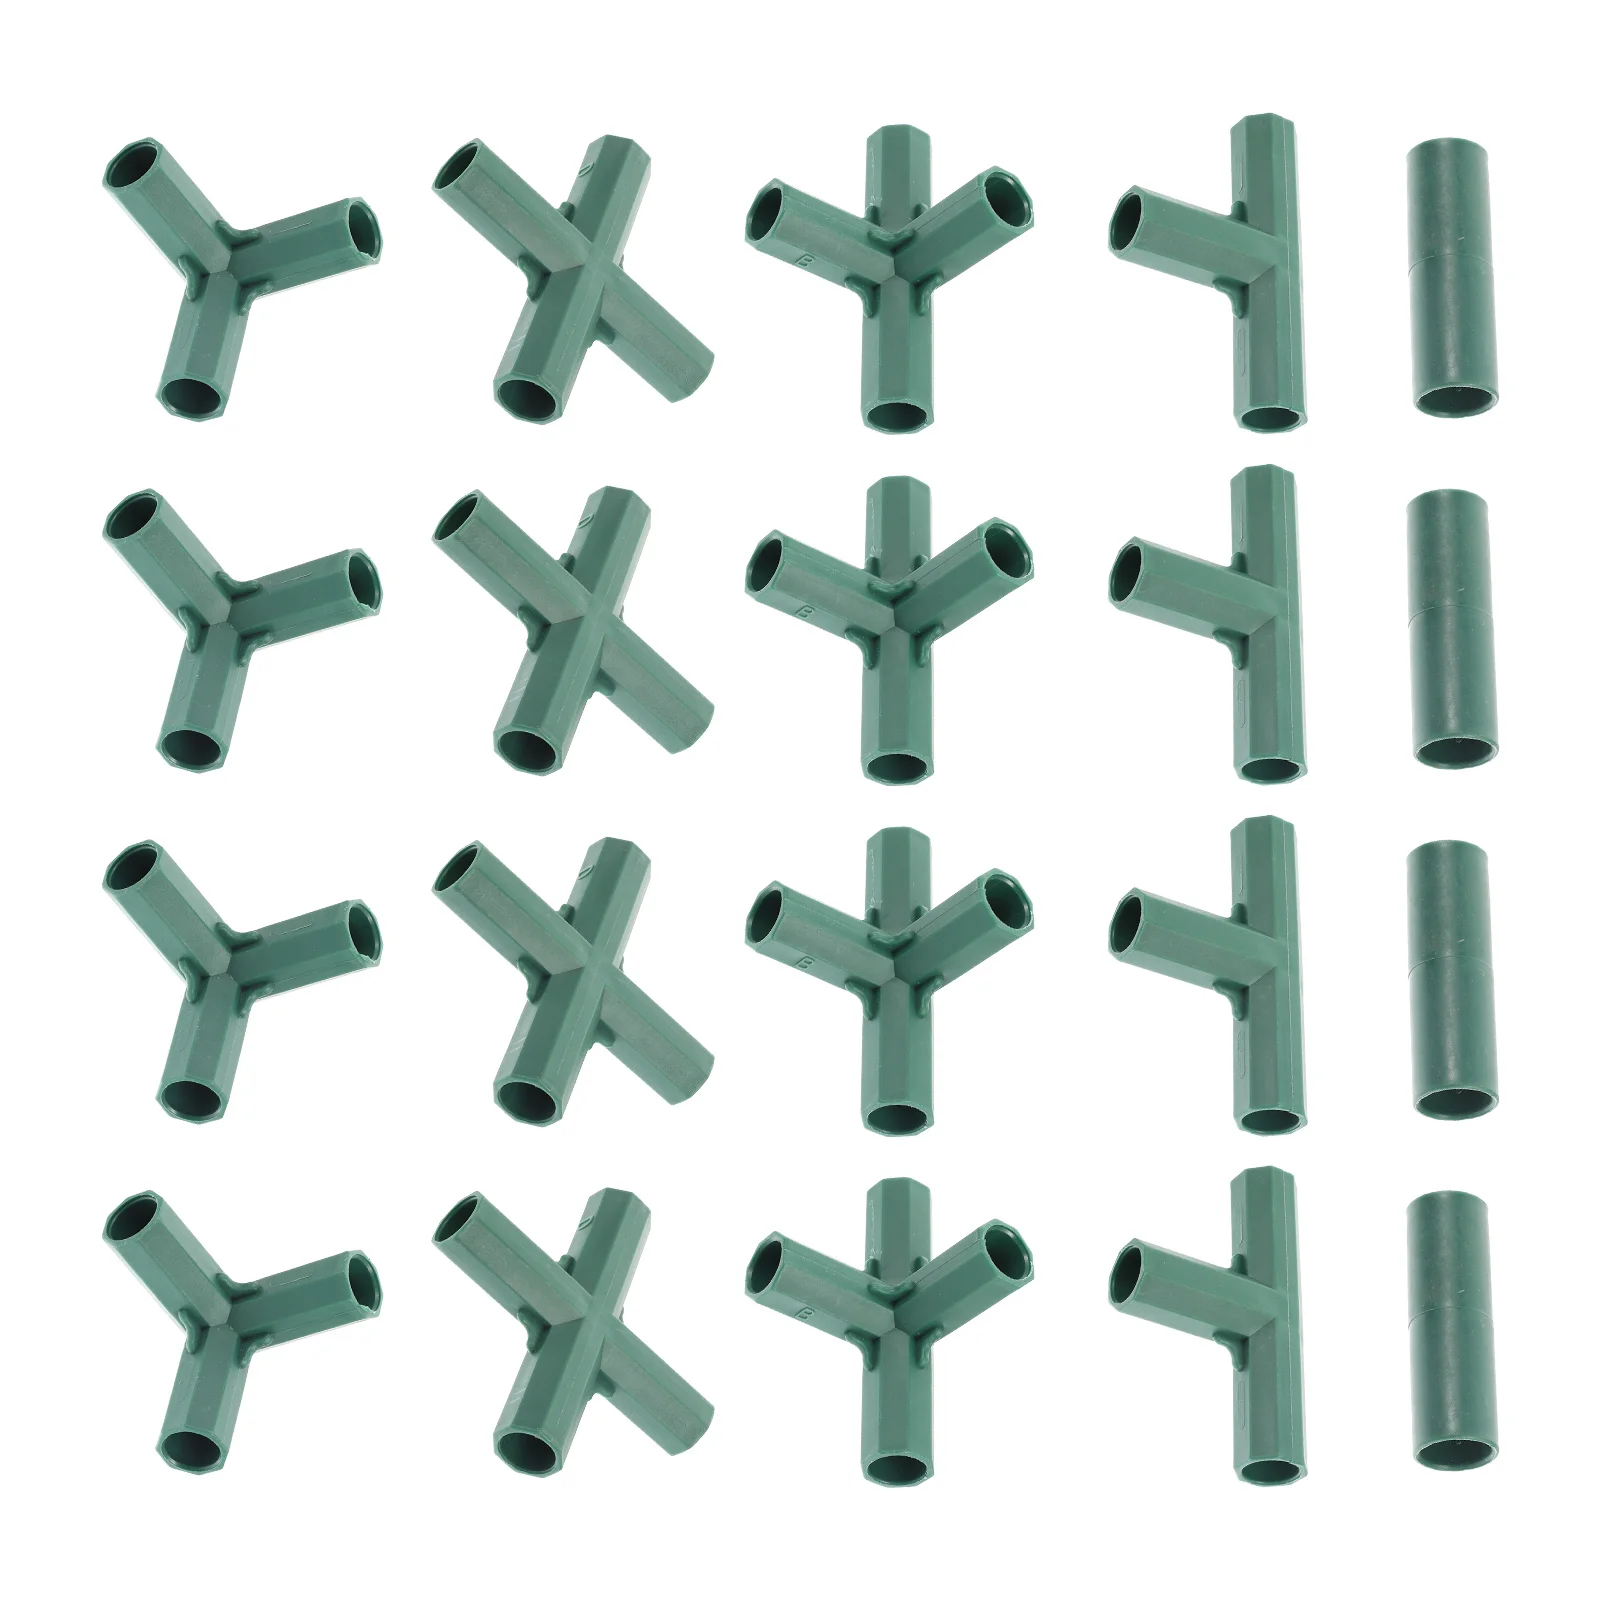 

20 Pcs Plant Stand Greenhouse Connector Gardening Frame Connectors Connection Tube Joints Stake Tubes Supplies Straight Tee